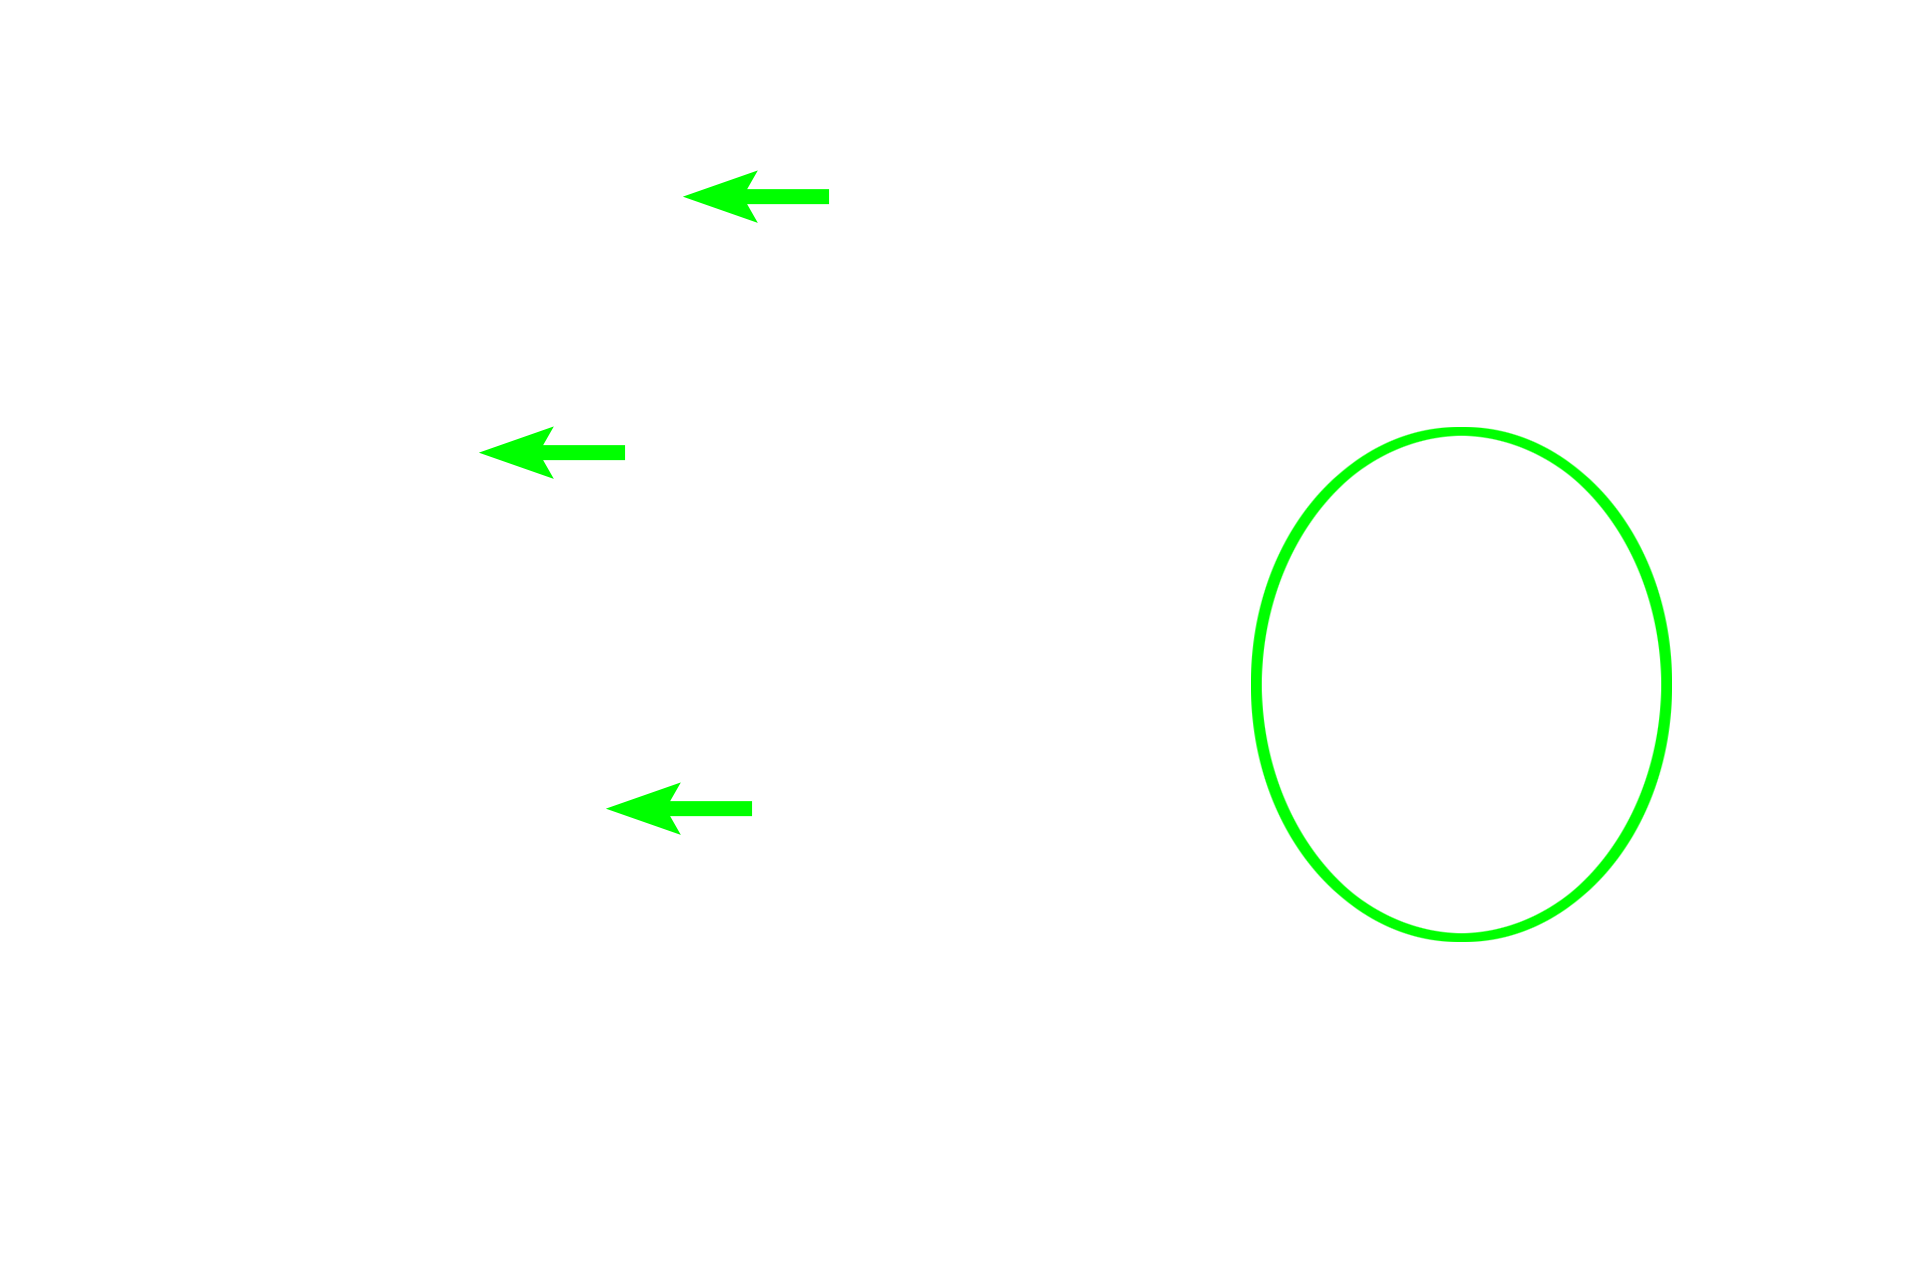 Leydig (interstitial) cells <p>Leydig (interstitial) cells constitute the endocrine portion of the testis.  They produce the steroid hormone, testosterone.  Steroid-secreting cells commonly have vacuoles in their cytoplasm, resulting from extraction of the lipid precursor molecules used in steroid synthesis. Blood vessels and lymphatics are abundant in the interstitium surrounding these cells. 1000x</p>
